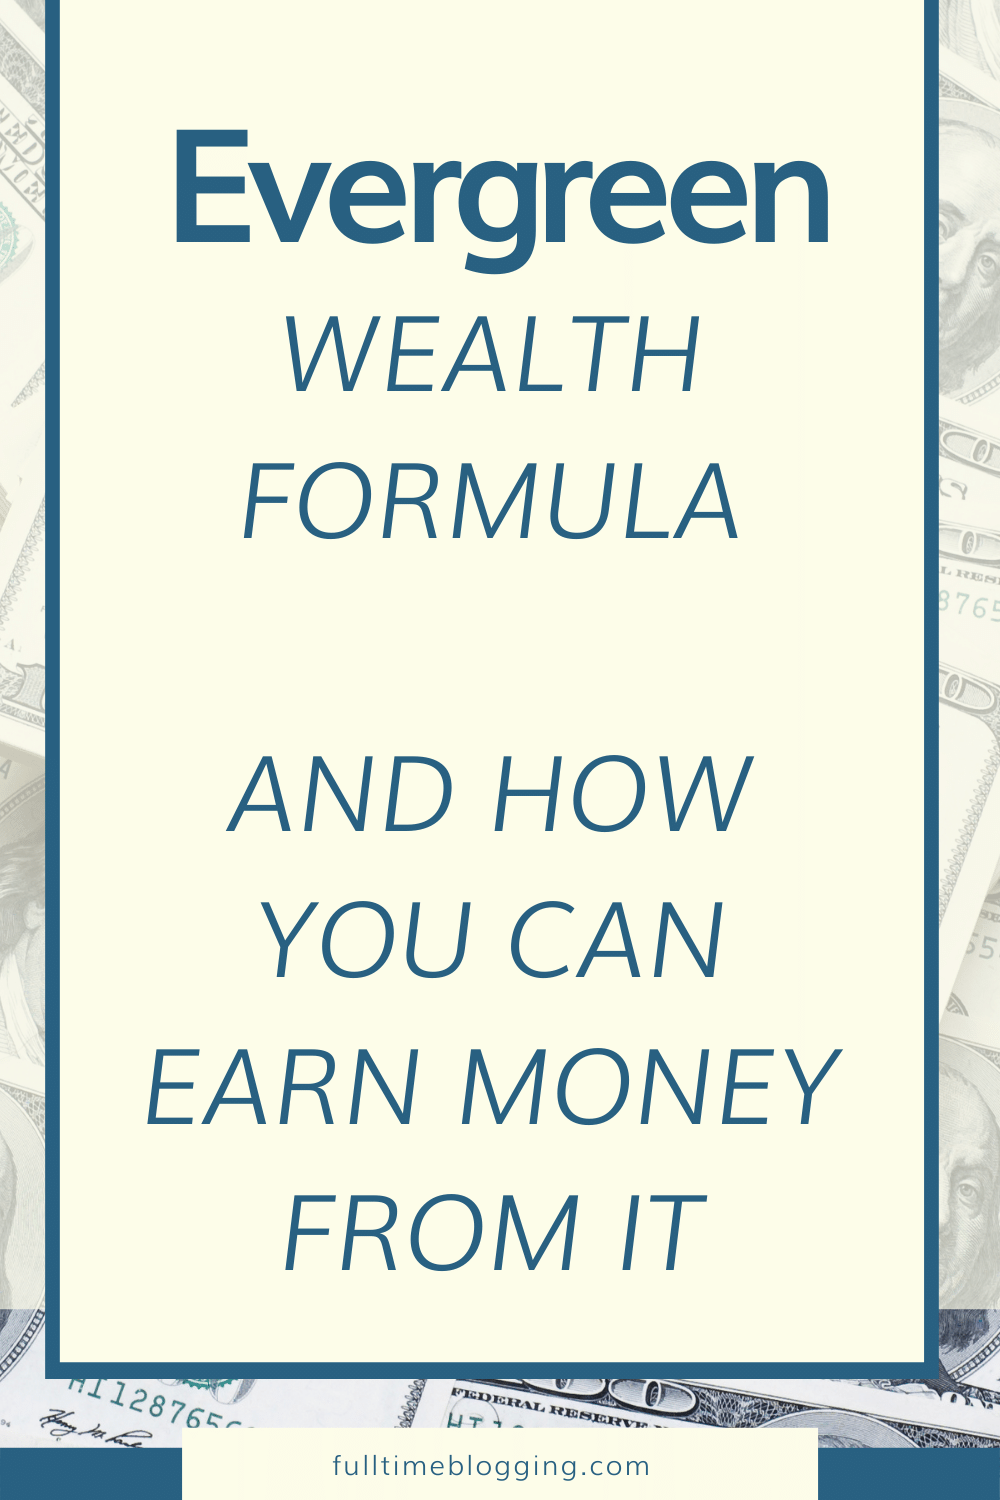 What Is Evergreen Wealth Formula About